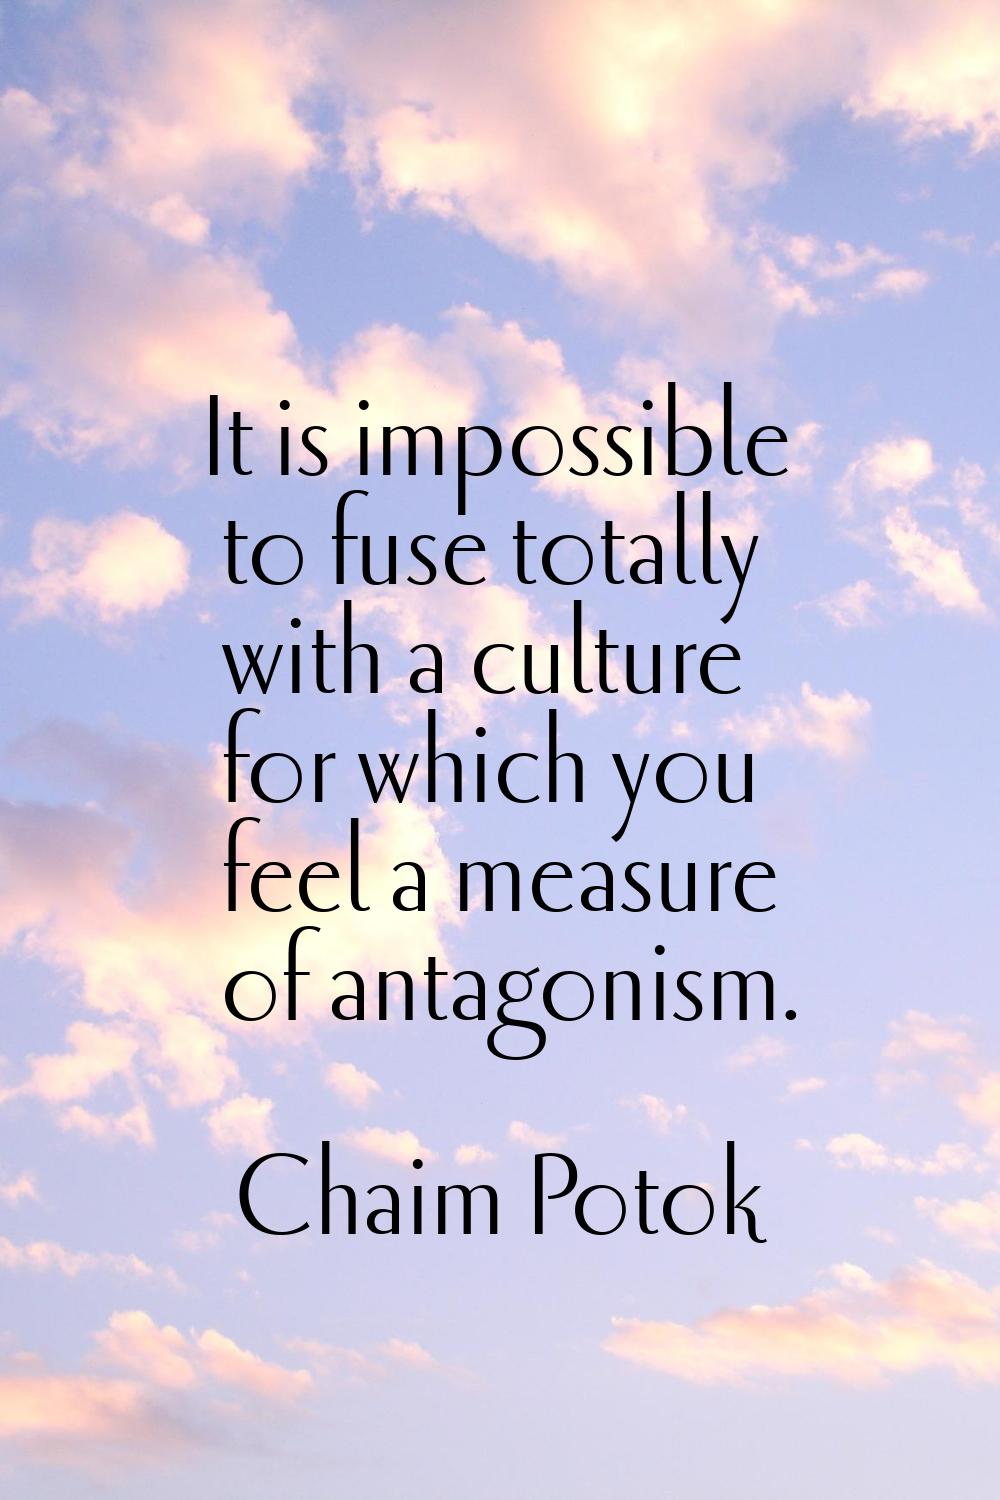 It is impossible to fuse totally with a culture for which you feel a measure of antagonism.